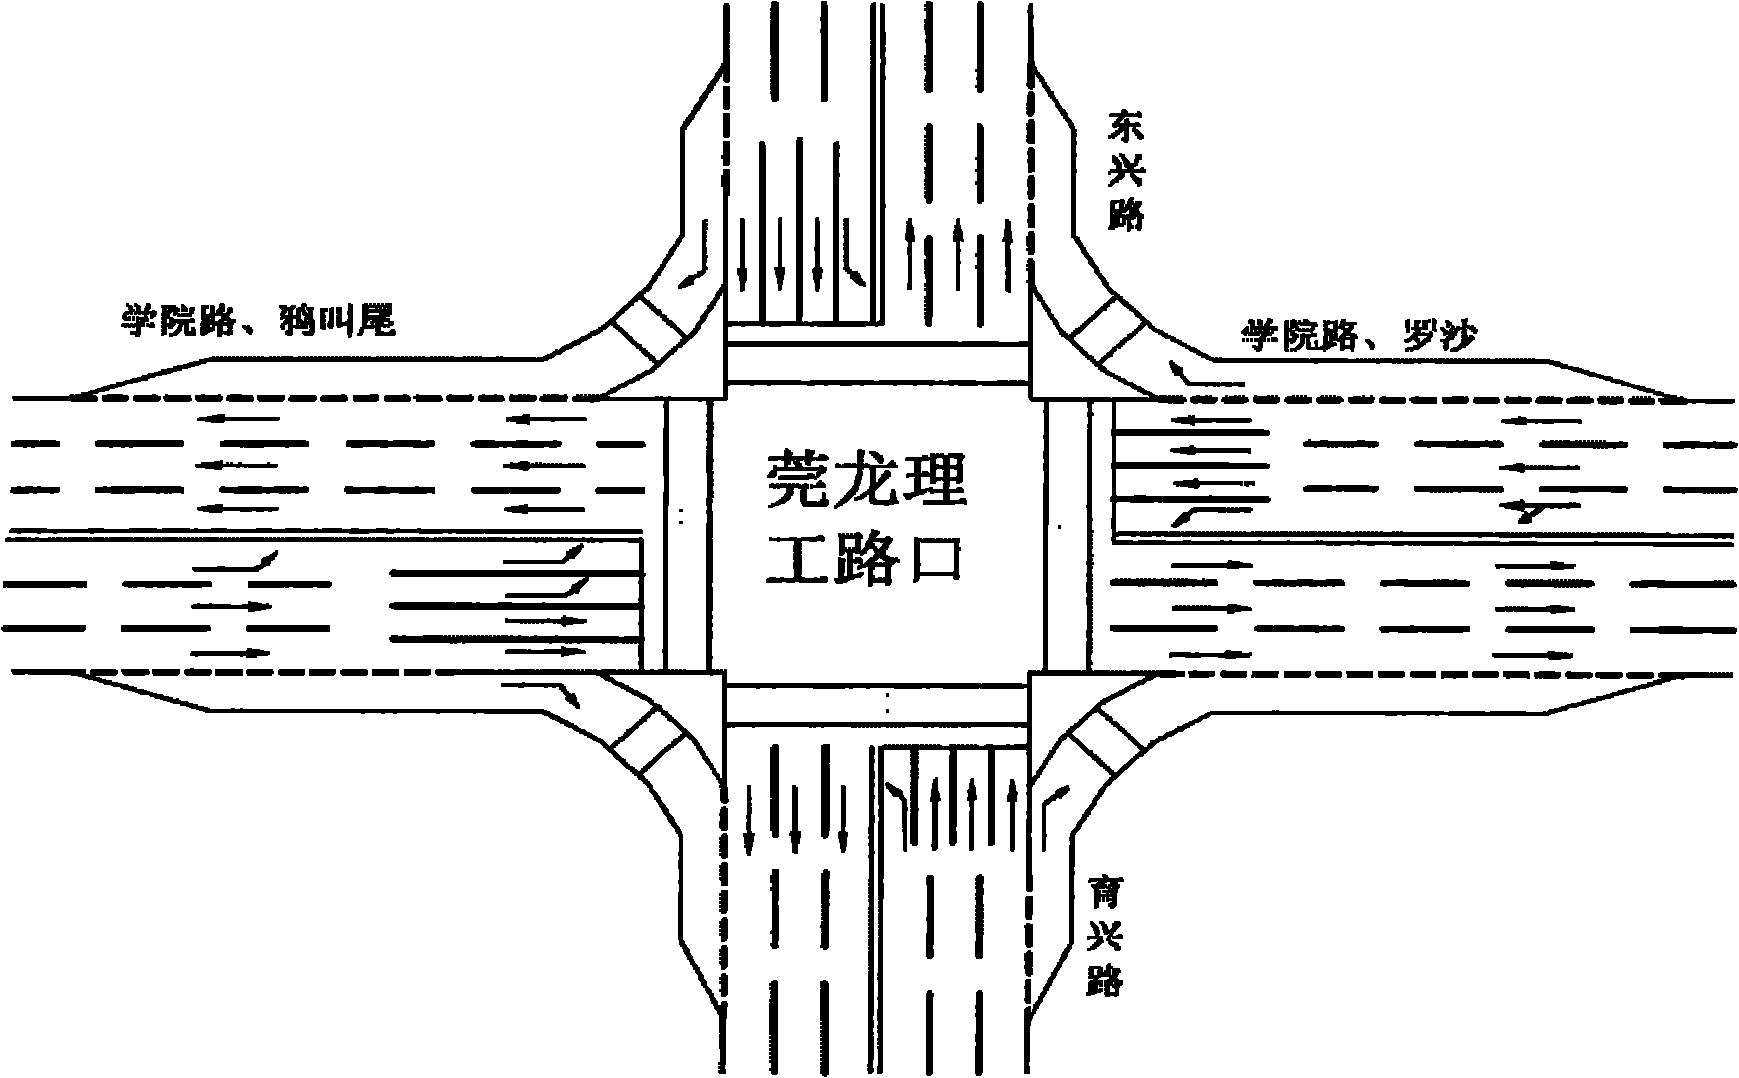 Method for building signal control model for urban traffic network crossroad